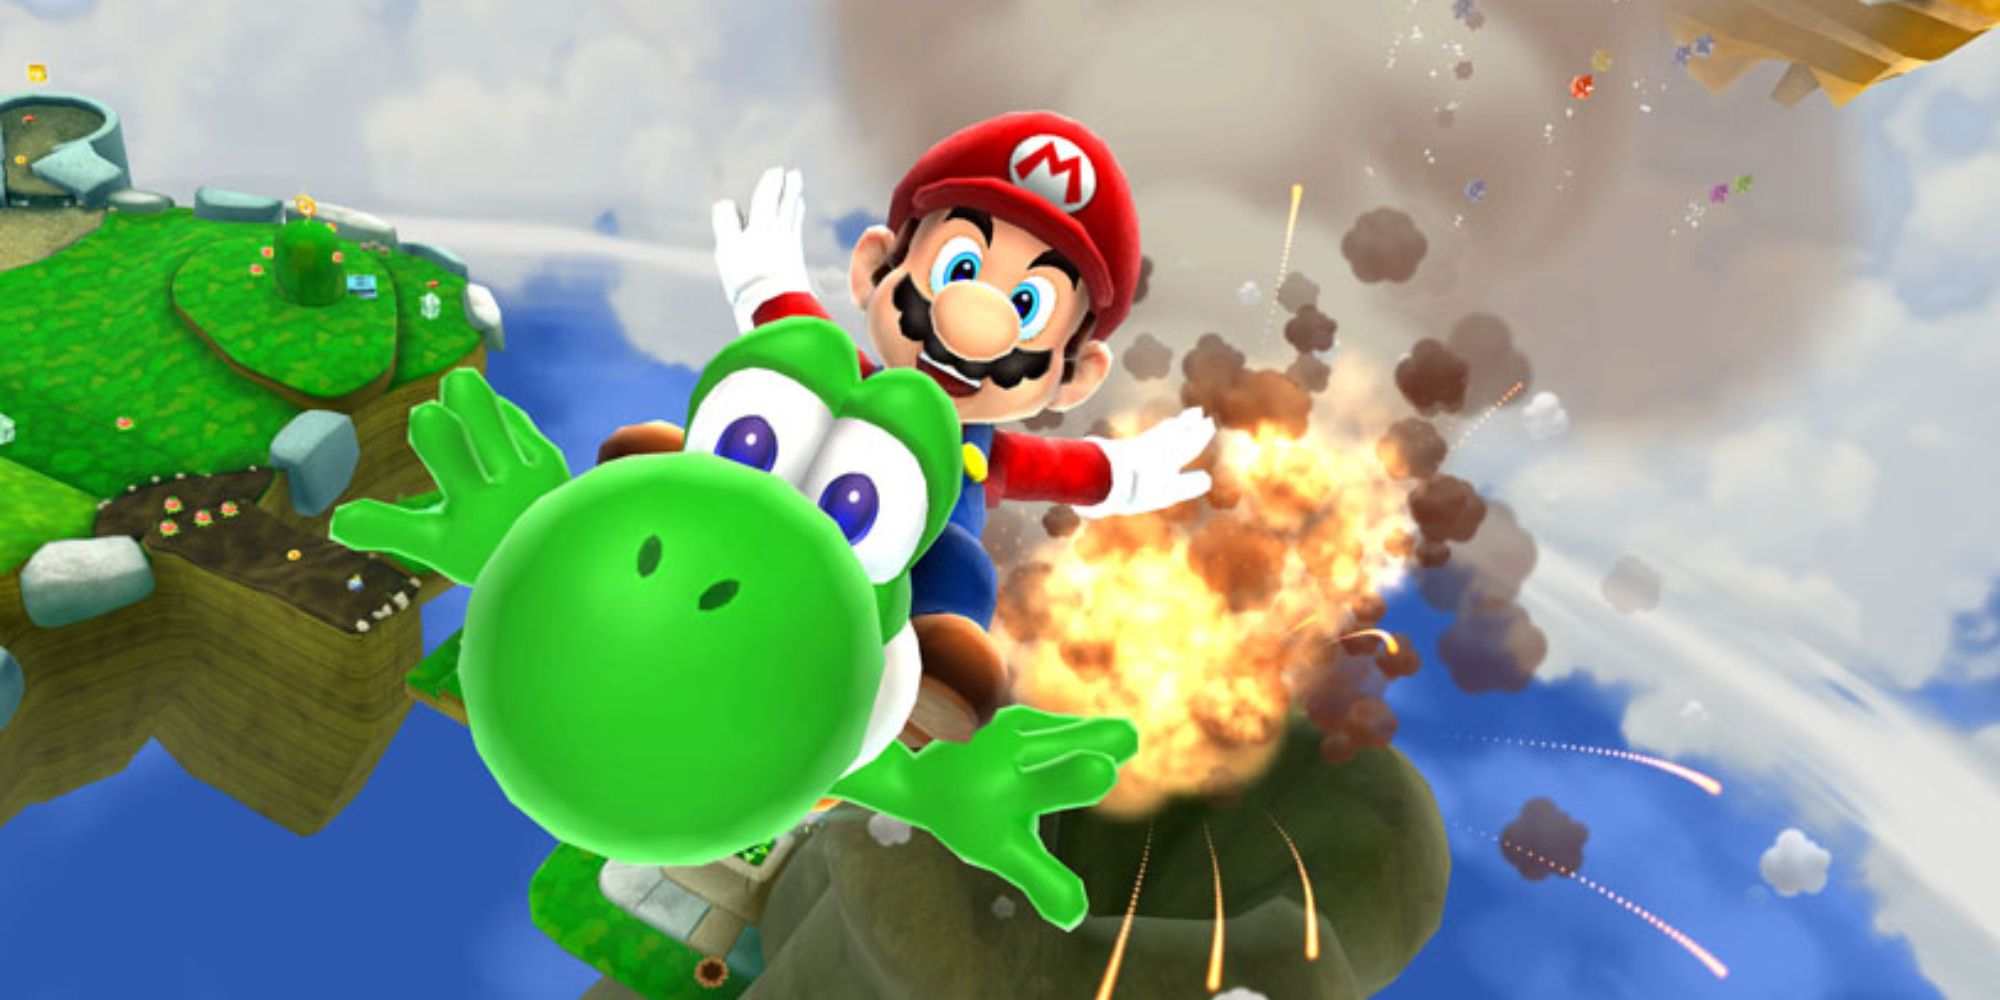 Mario and Yoshi flying in the sky